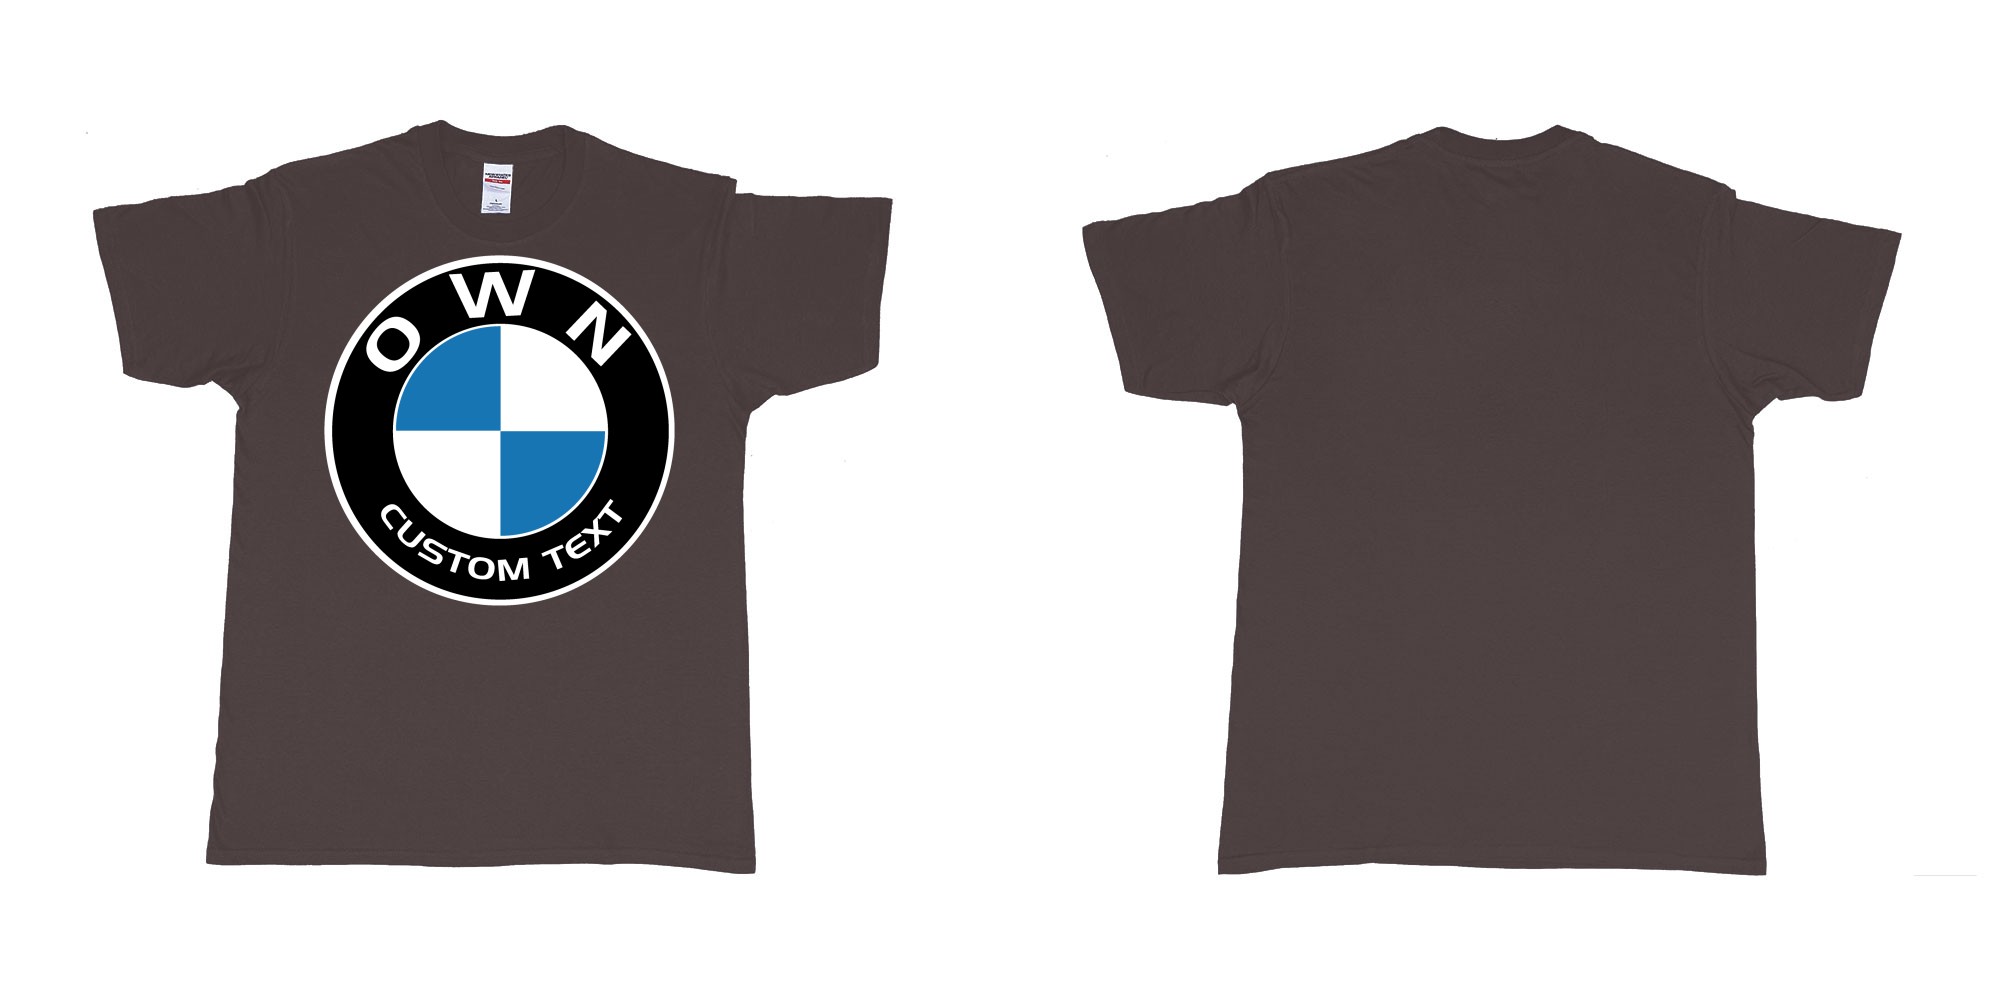 Custom tshirt design BMW logo custom text tshirt printing in fabric color dark-chocolate choice your own text made in Bali by The Pirate Way